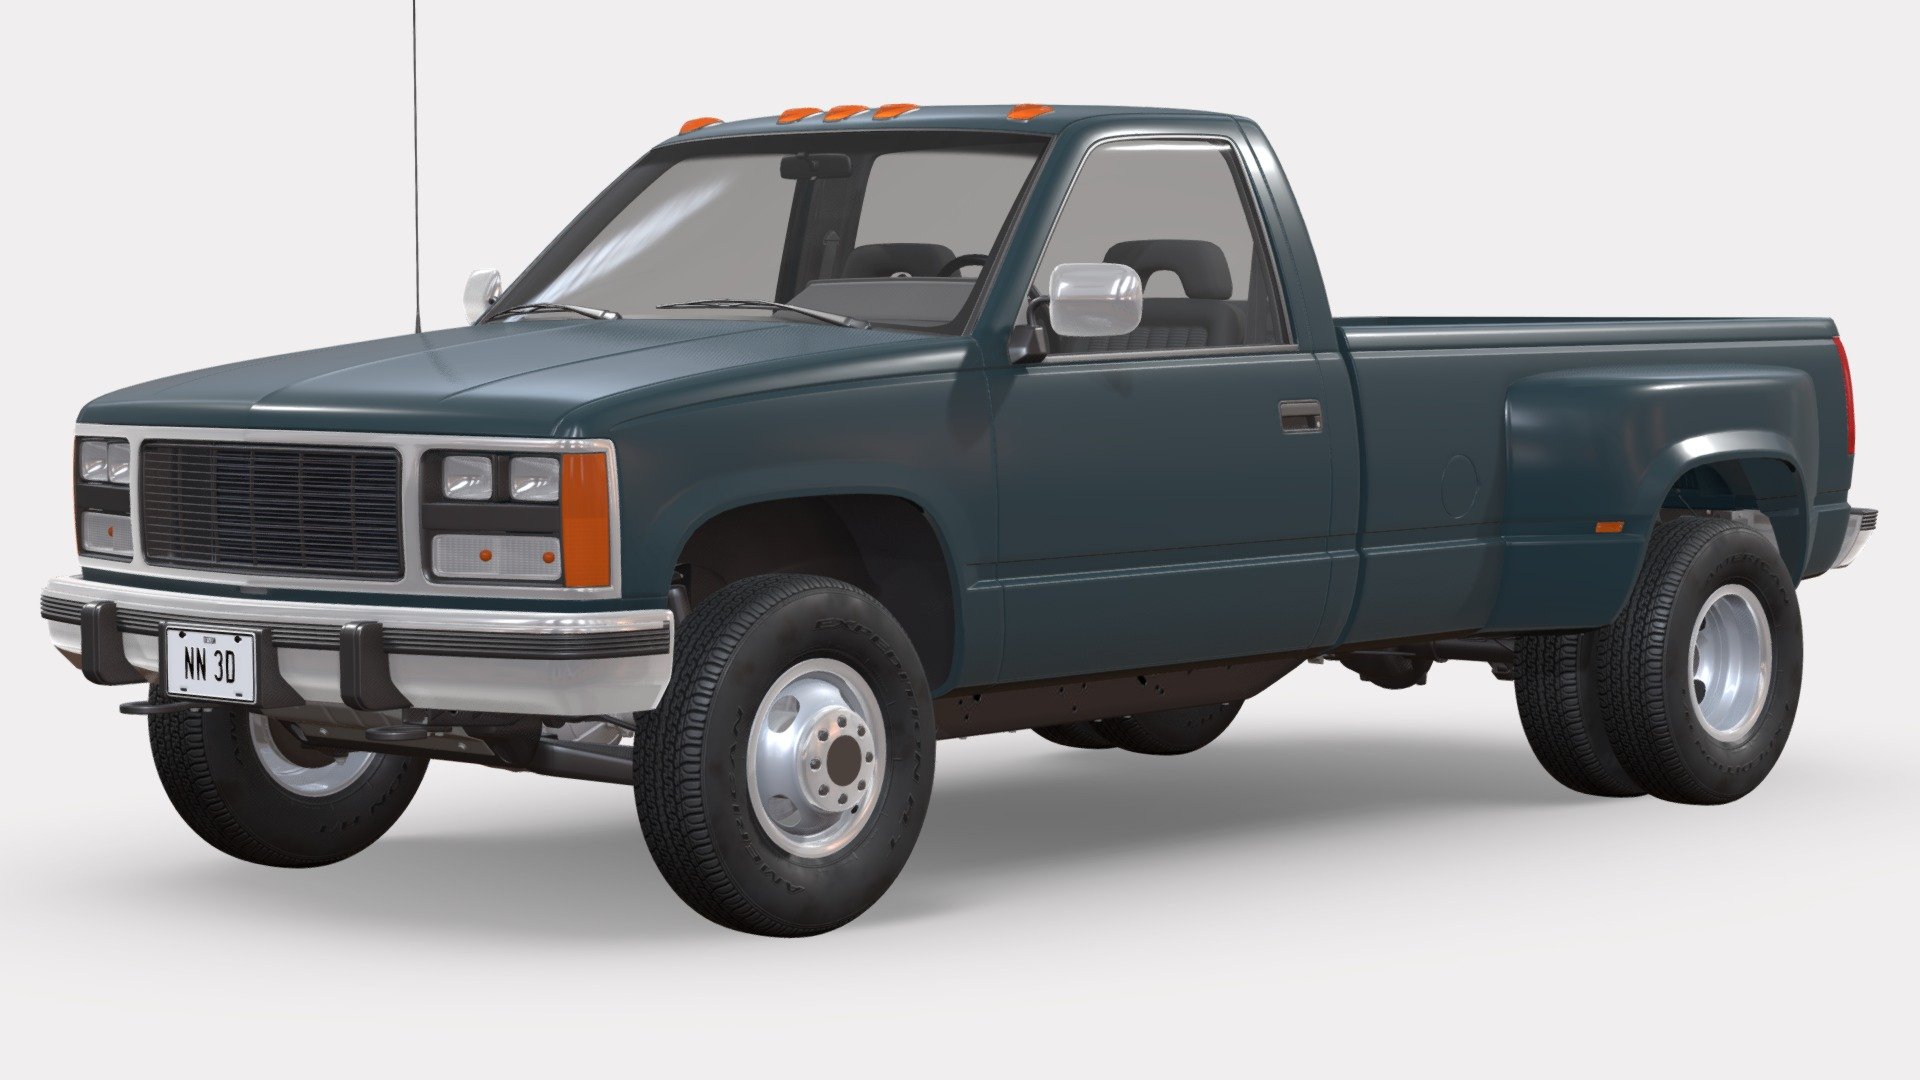 NN 3D store.

3D model of a modern long bed dually pickup truck.

The truck's high detail exterior and interior are great for close up renders and the undercarriage has enough visible parts for close range shots.

The model was created with 3DS Max 2016 using the open subdivision modifier which has been left in the stack to adjust the level of detail.

There are also included HI and LO poly versions in Blender format with textures.

Exchange files included: FBX and OBJ with HI and LO poly versions, 3DS only with LO poly version.

SPECIFICATIONS:

The model has 173.000 polygons with subdivision level at 0 and 193.000 at level 1.

All textures are included and mapped in all files but they will render like the preview images only in 3DSMax and Blender versions with V-Ray and Cycles respectively, the rest of the files might have to be adjusted depending on the software you are using.

Textures are in PNG and JPG format with 4096x4096, 2048x2048 and 1024x1024 resolution 3d model